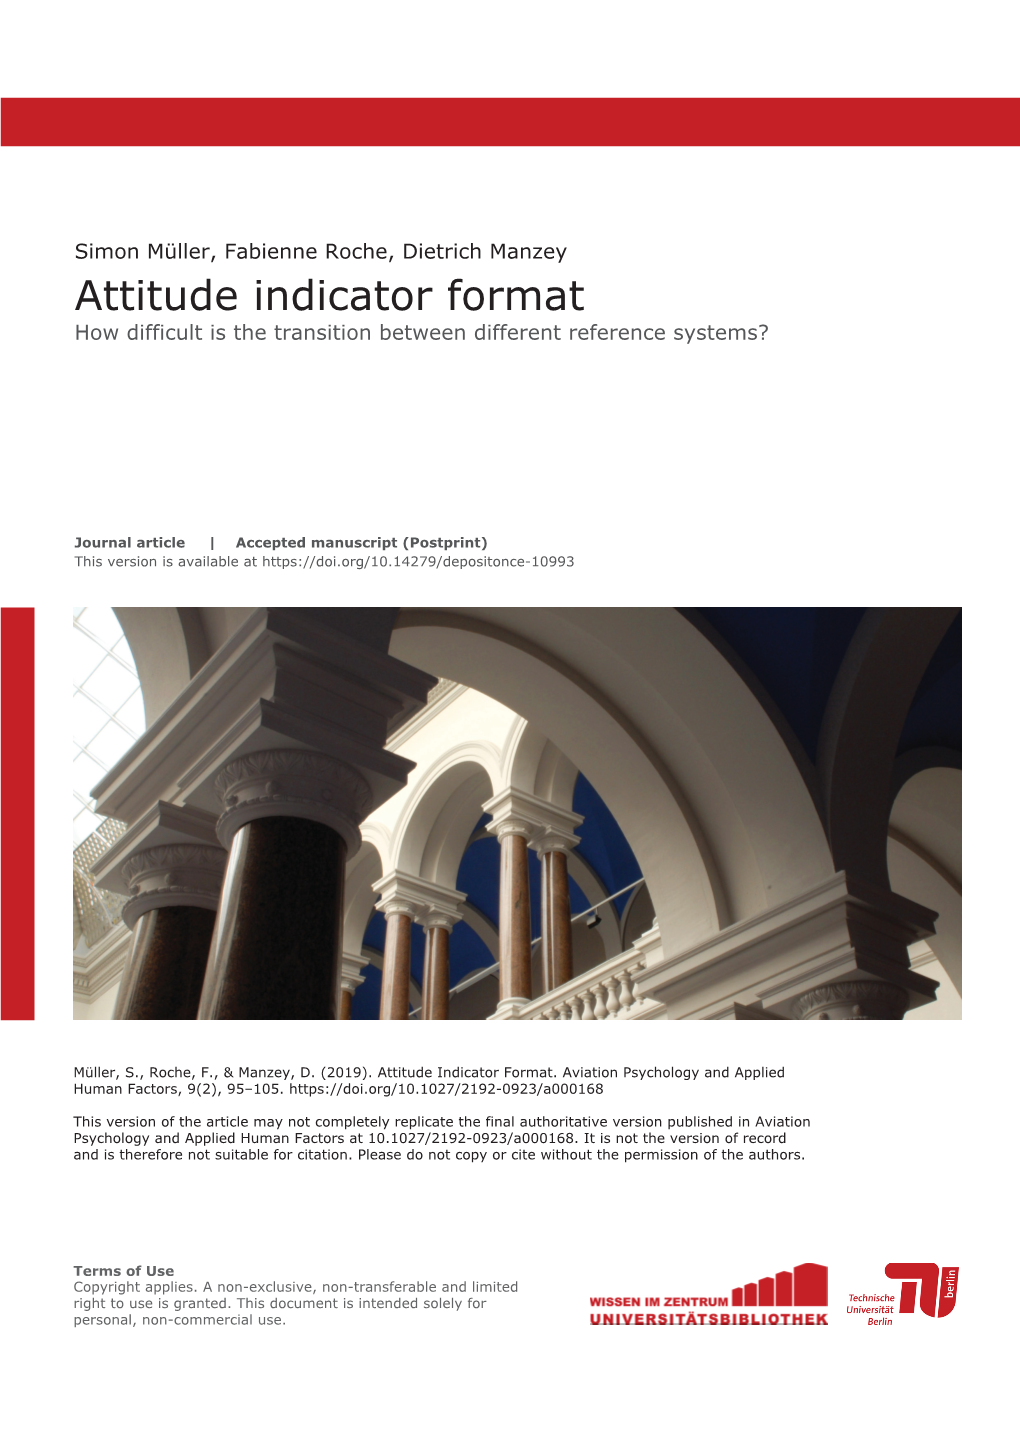 Attitude Indicator Format: How Difficult Is the Transition Between Different